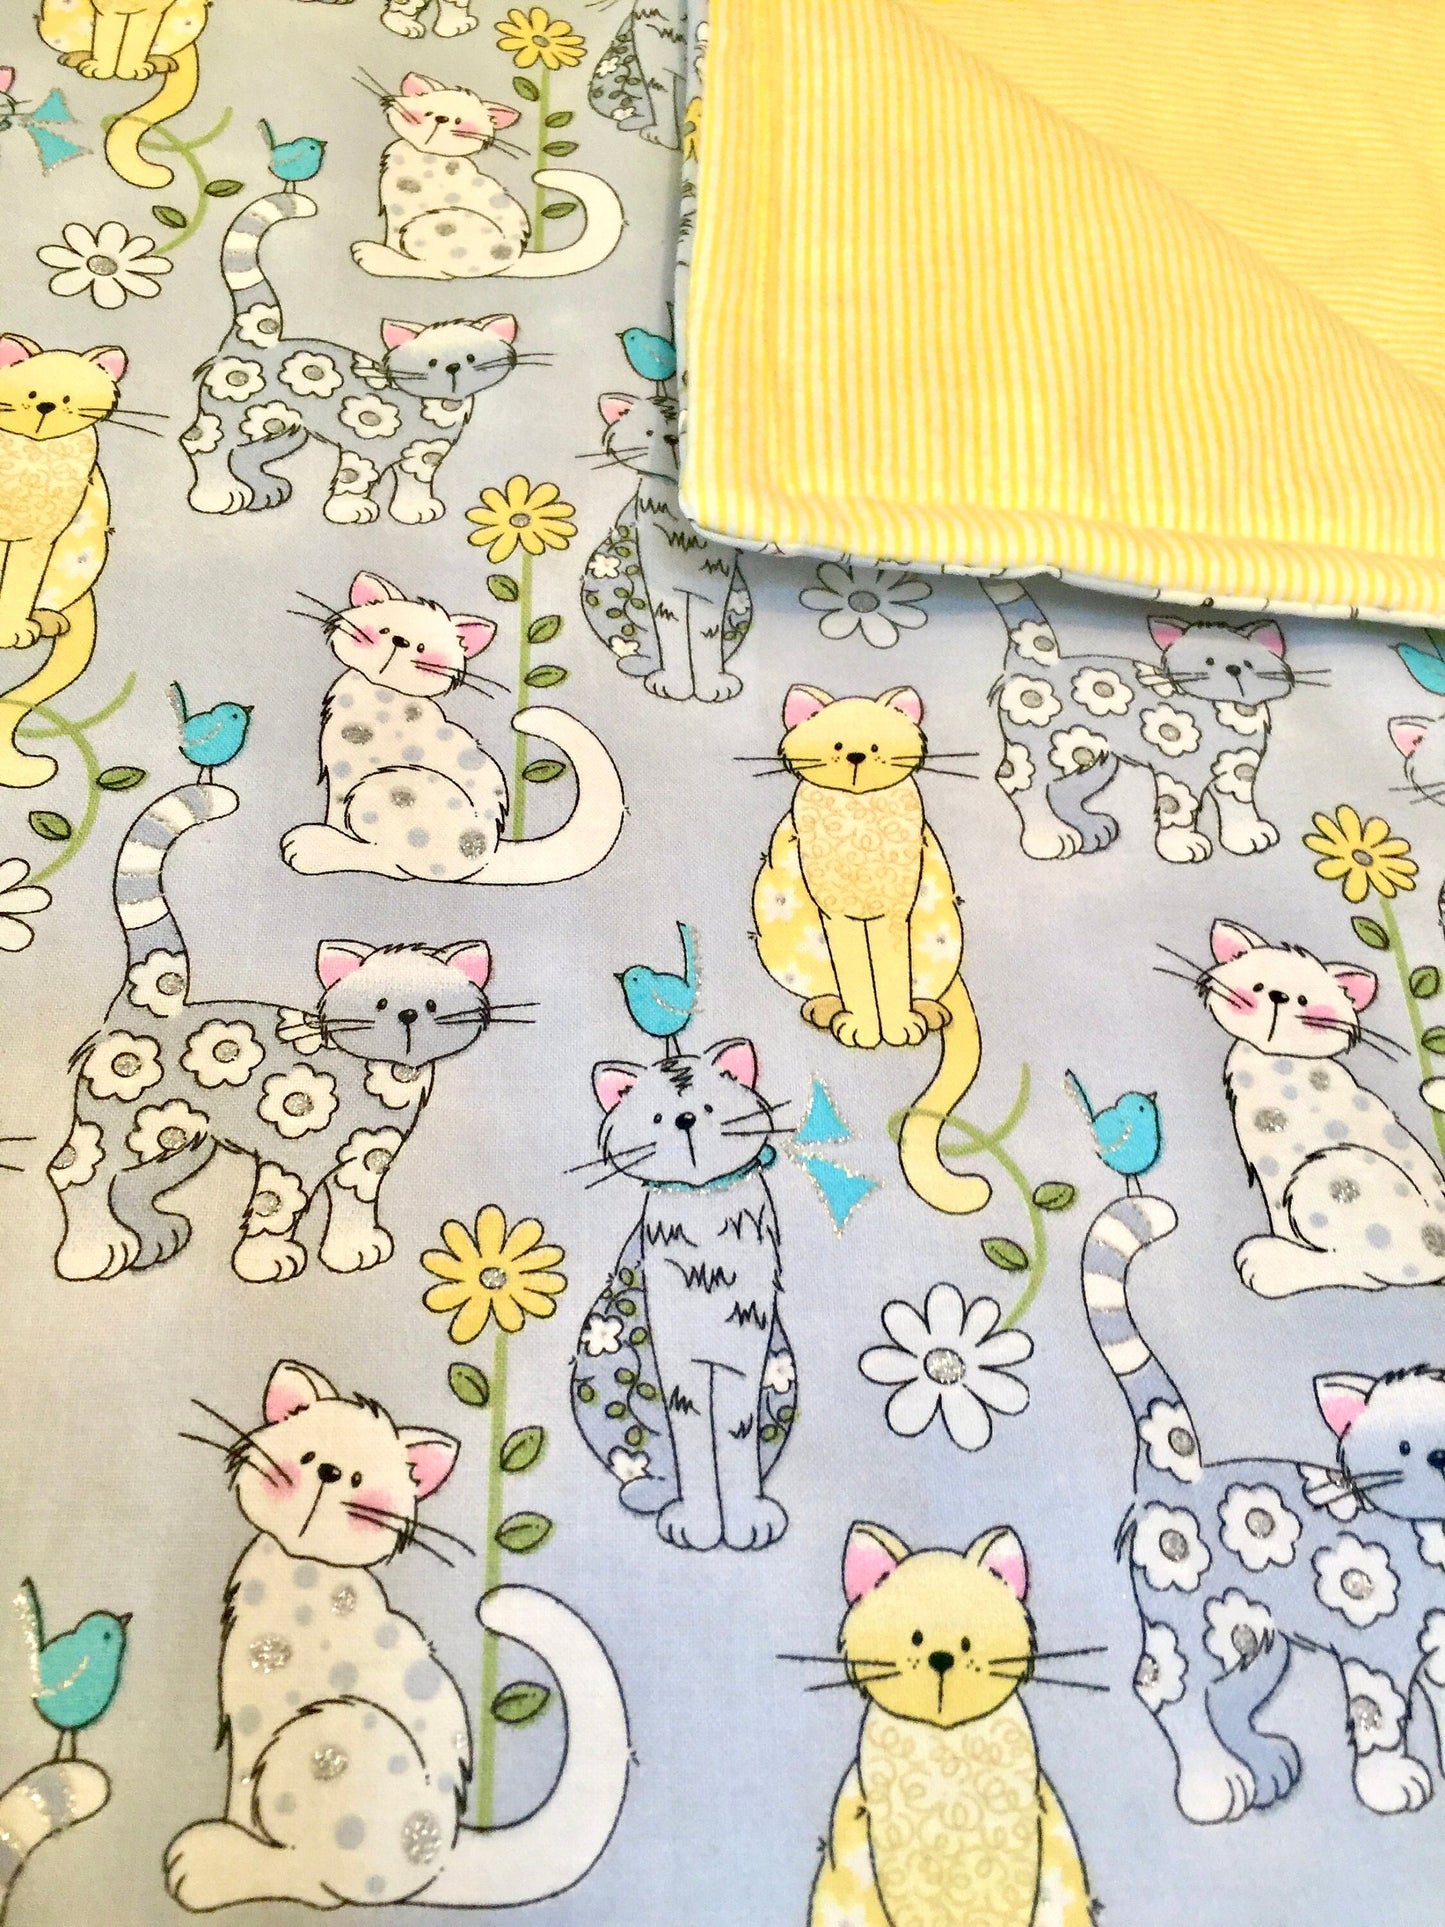 The most beautiful cat and kitten blanket ever!